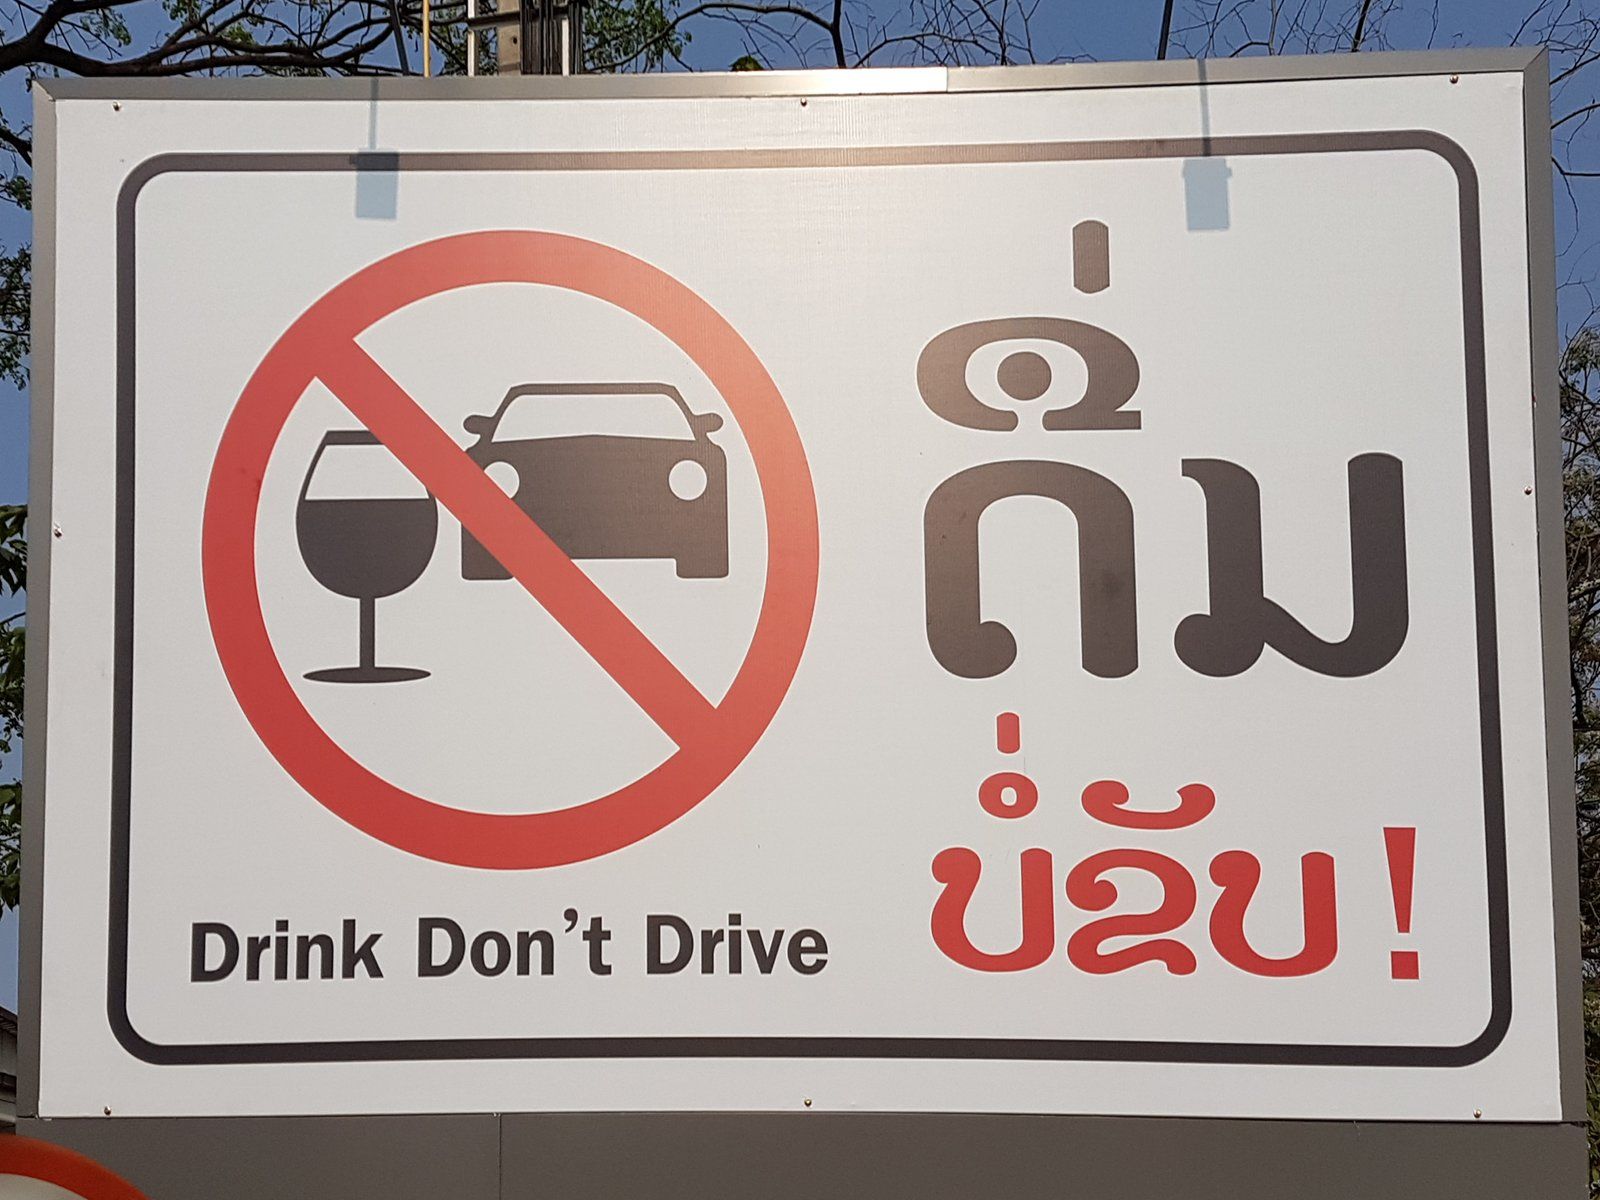 Drink don't drive